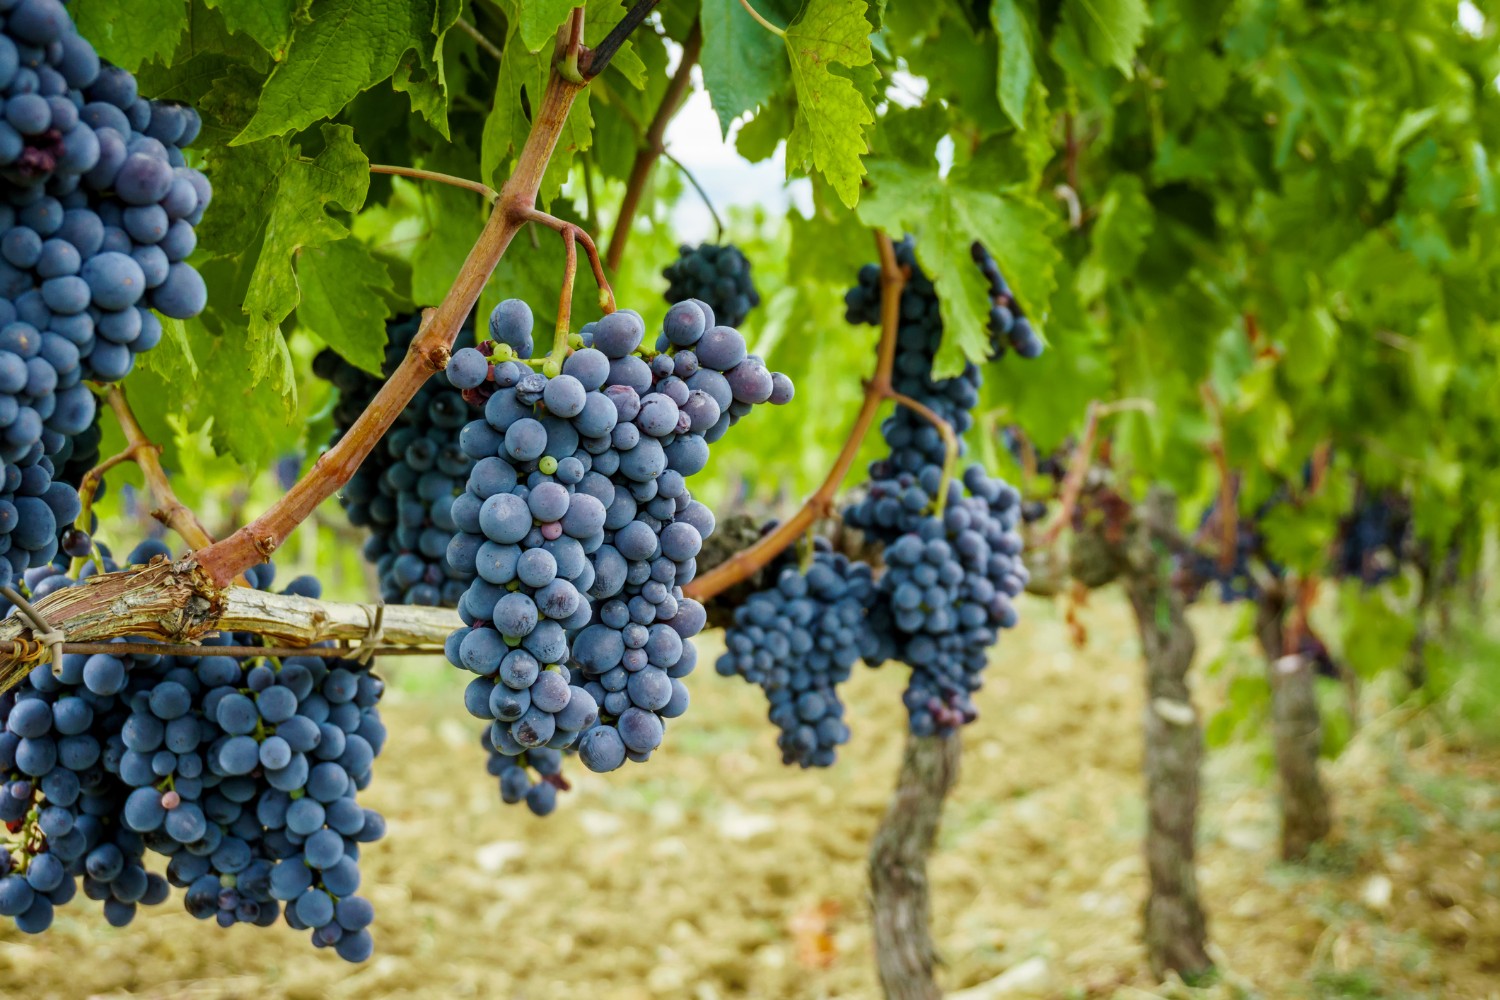 A cluster of ripe grapes at a vineyard in Pleasanton, CA.